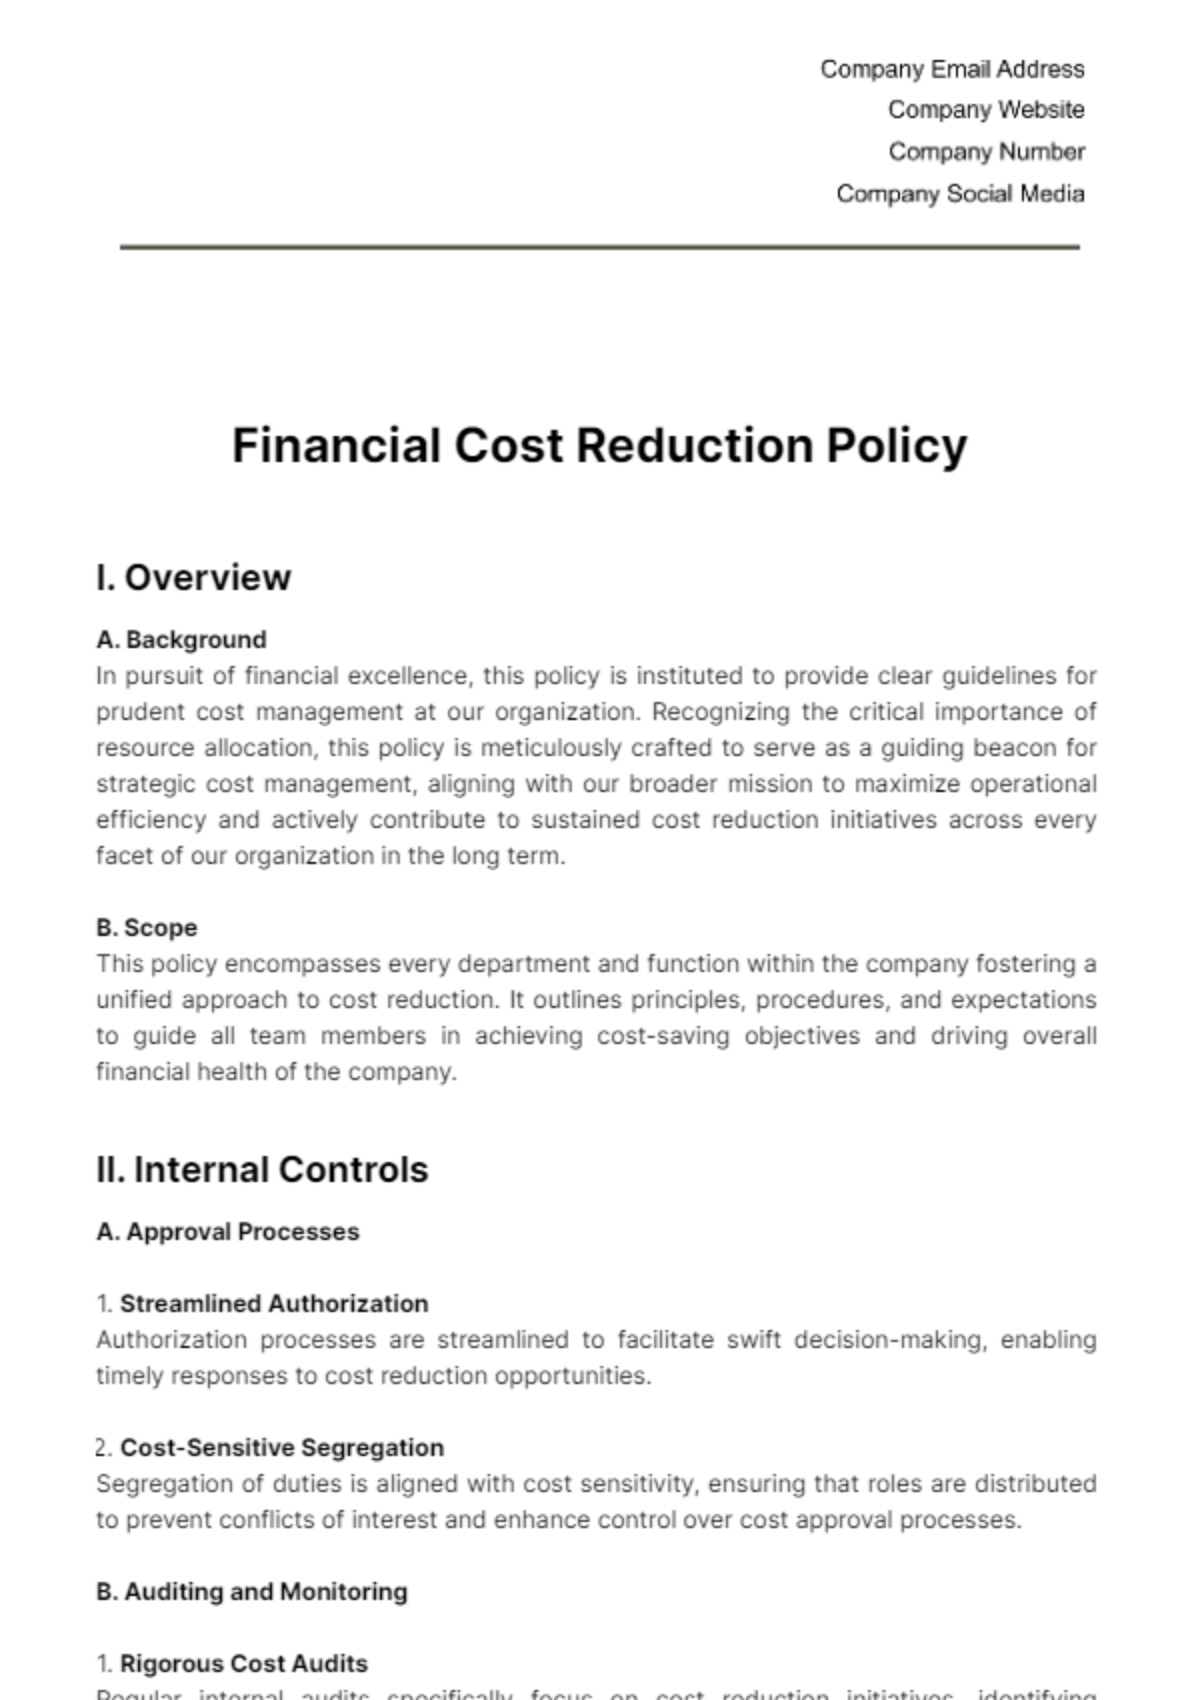 Financial Cost Reduction Policy Template